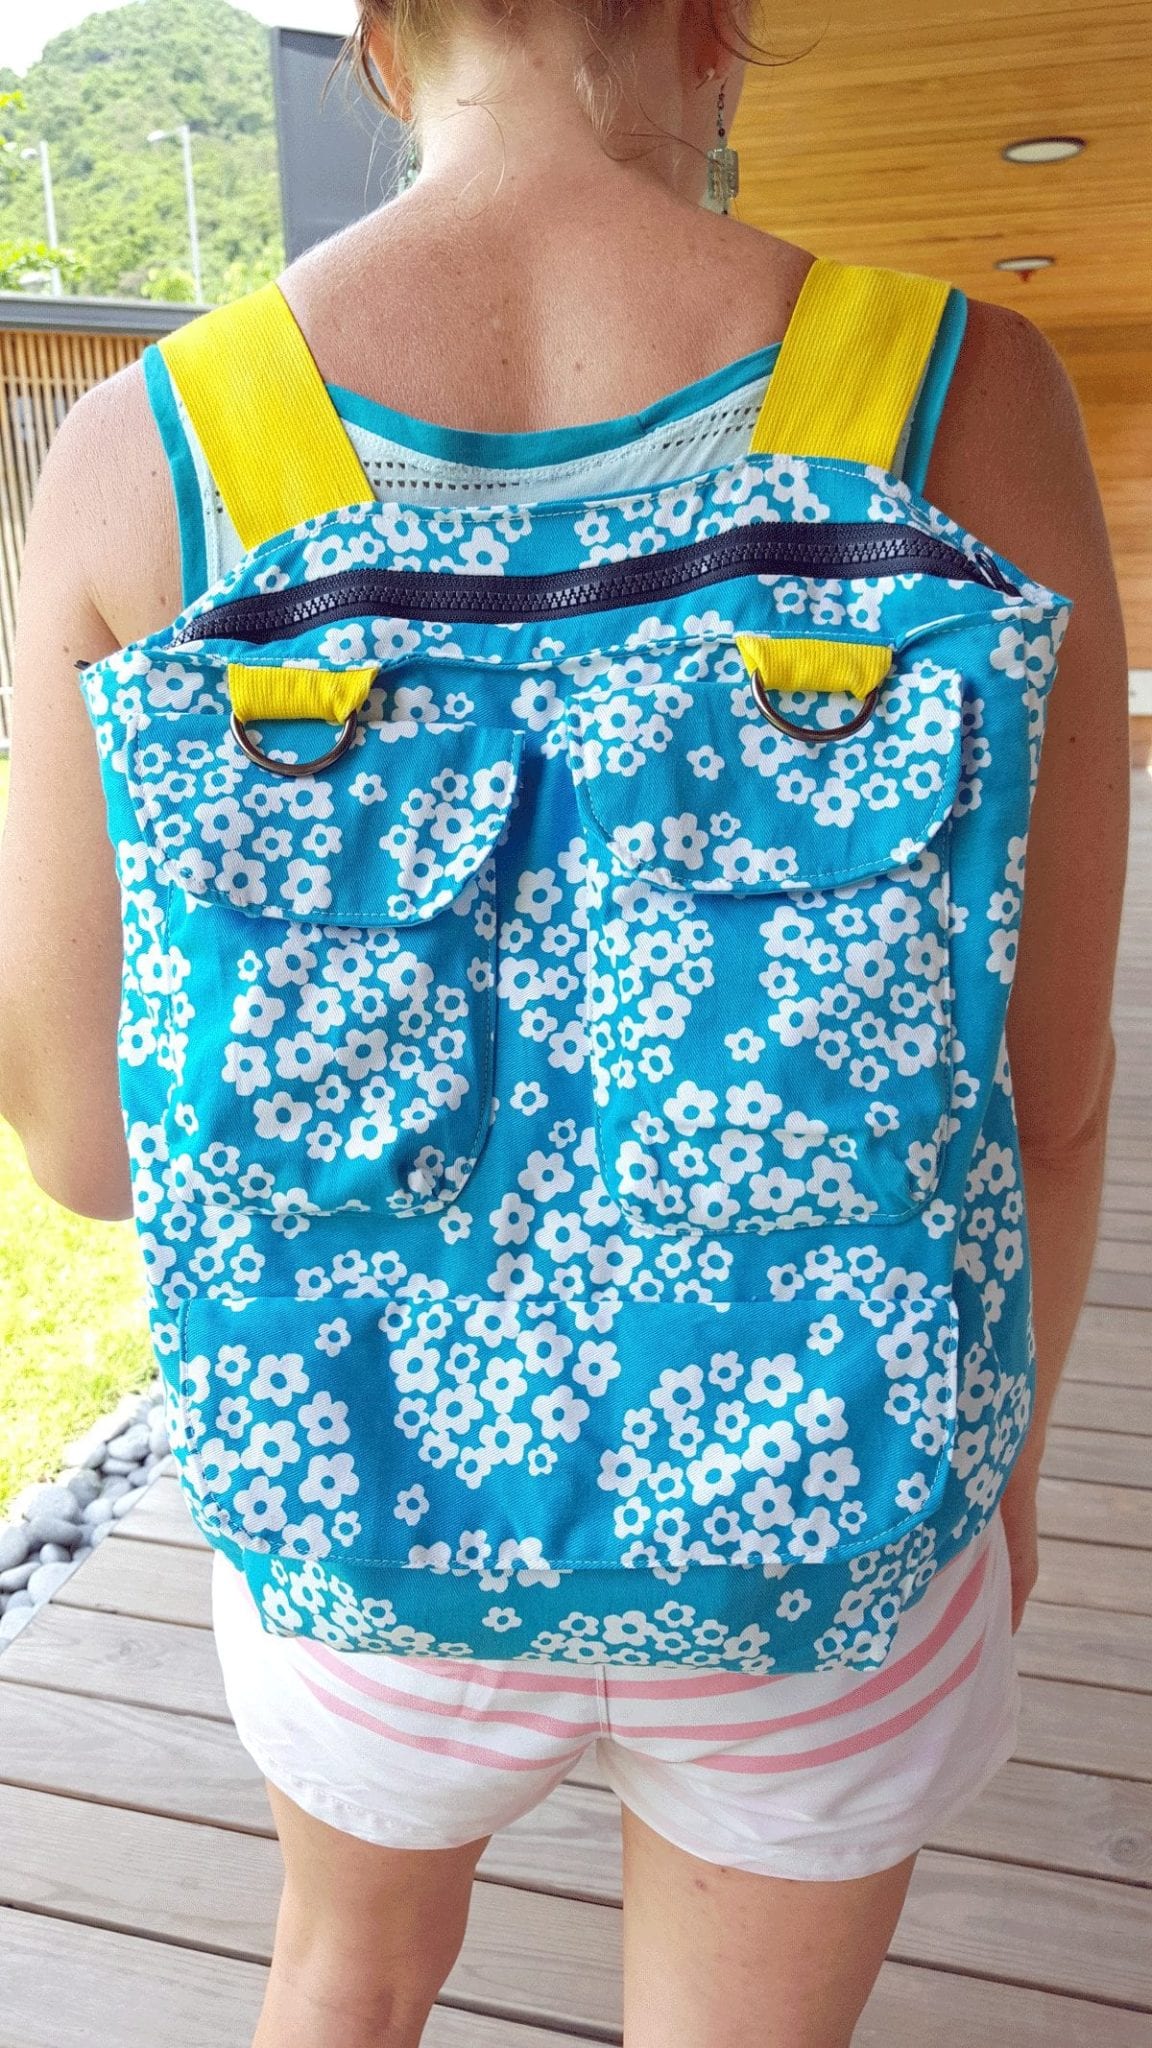 Convertible Purse-Backpack FREE Pattern and Tutorial